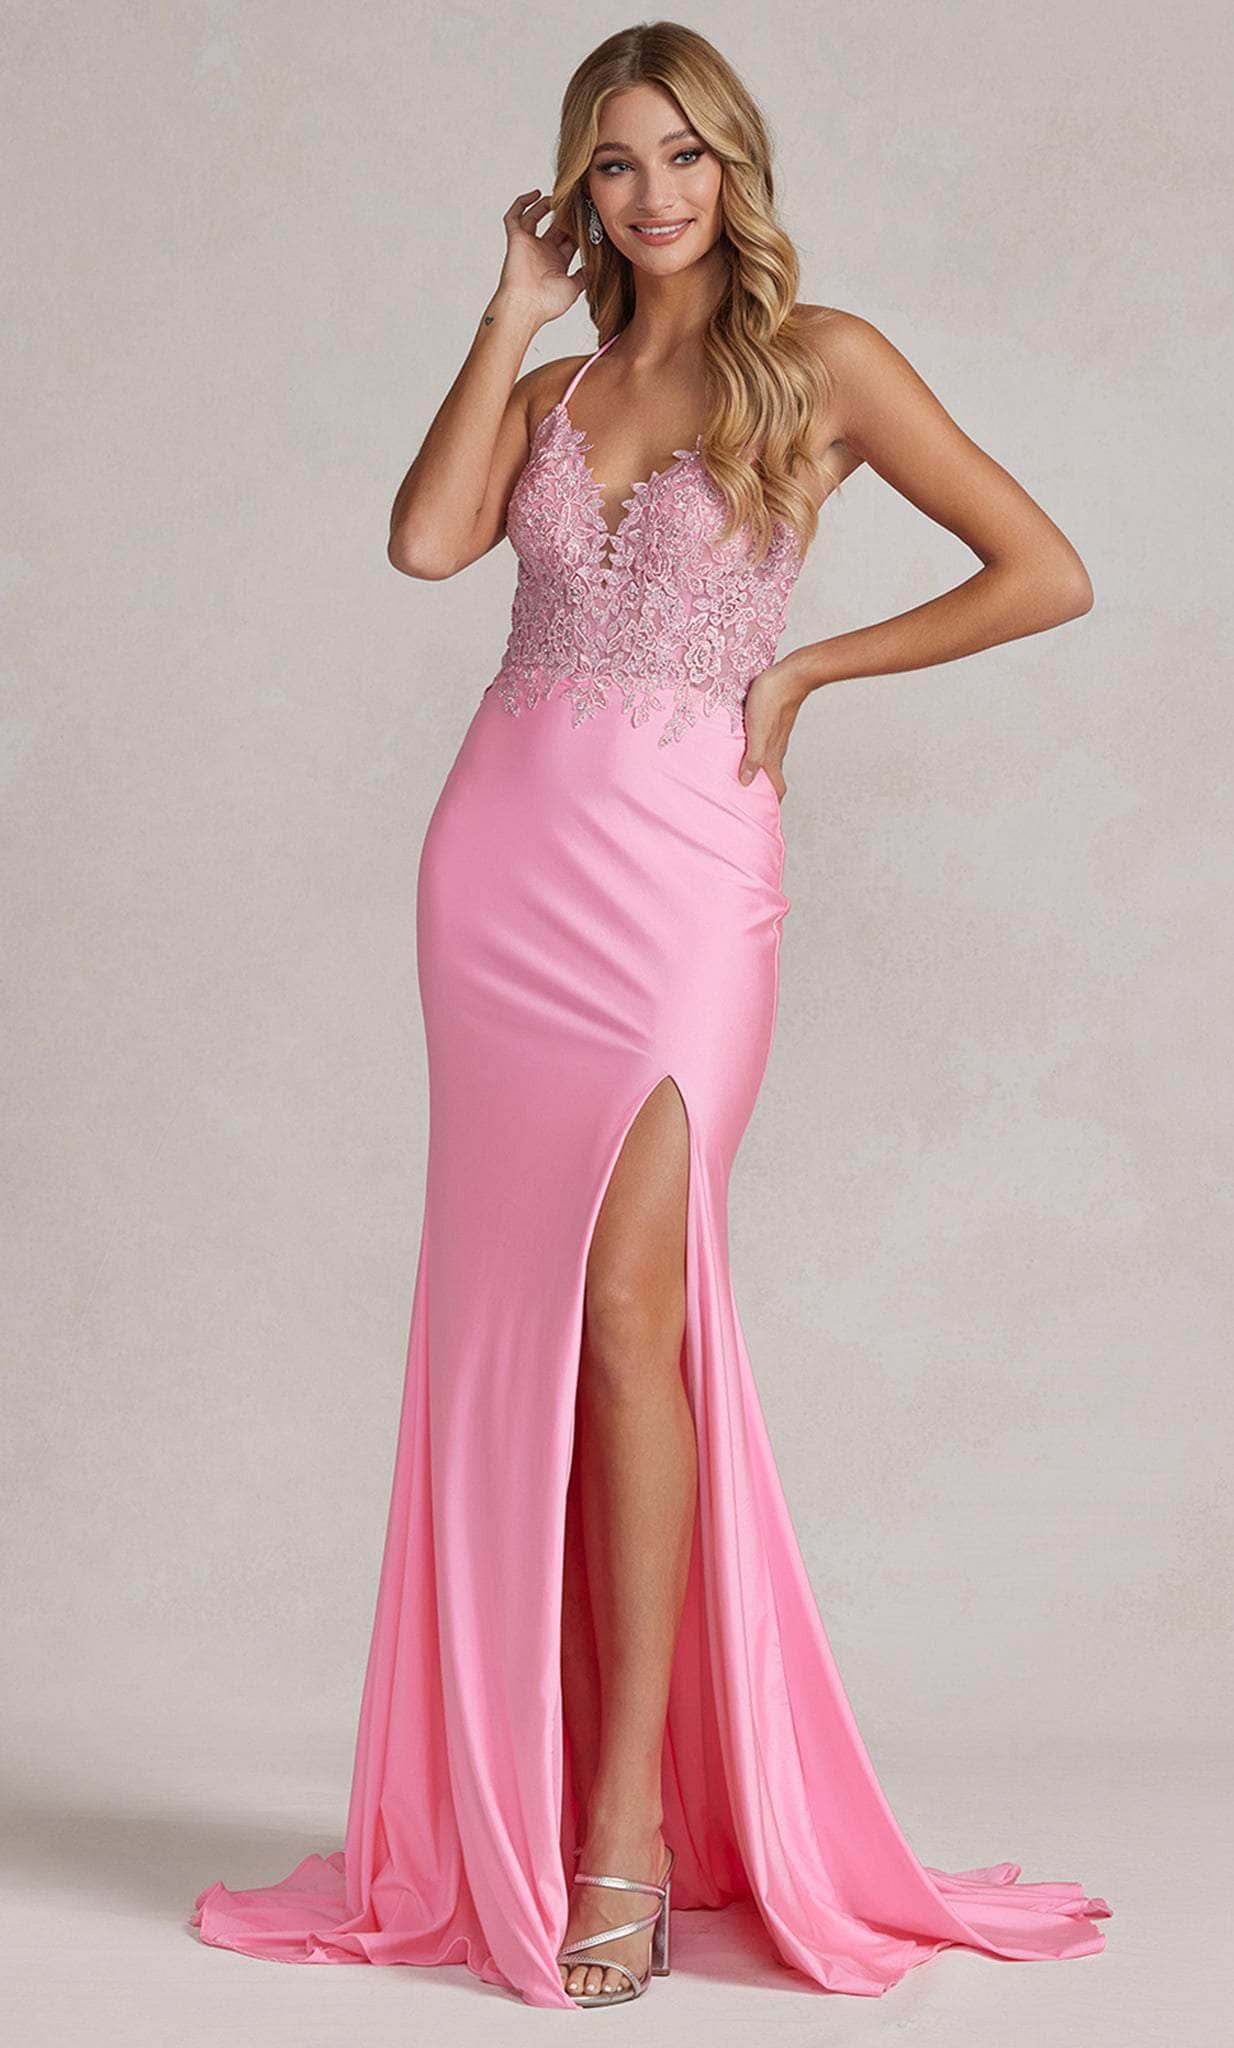 Image of Nox Anabel G1150 - V-Neck Strappy Back Prom Gown